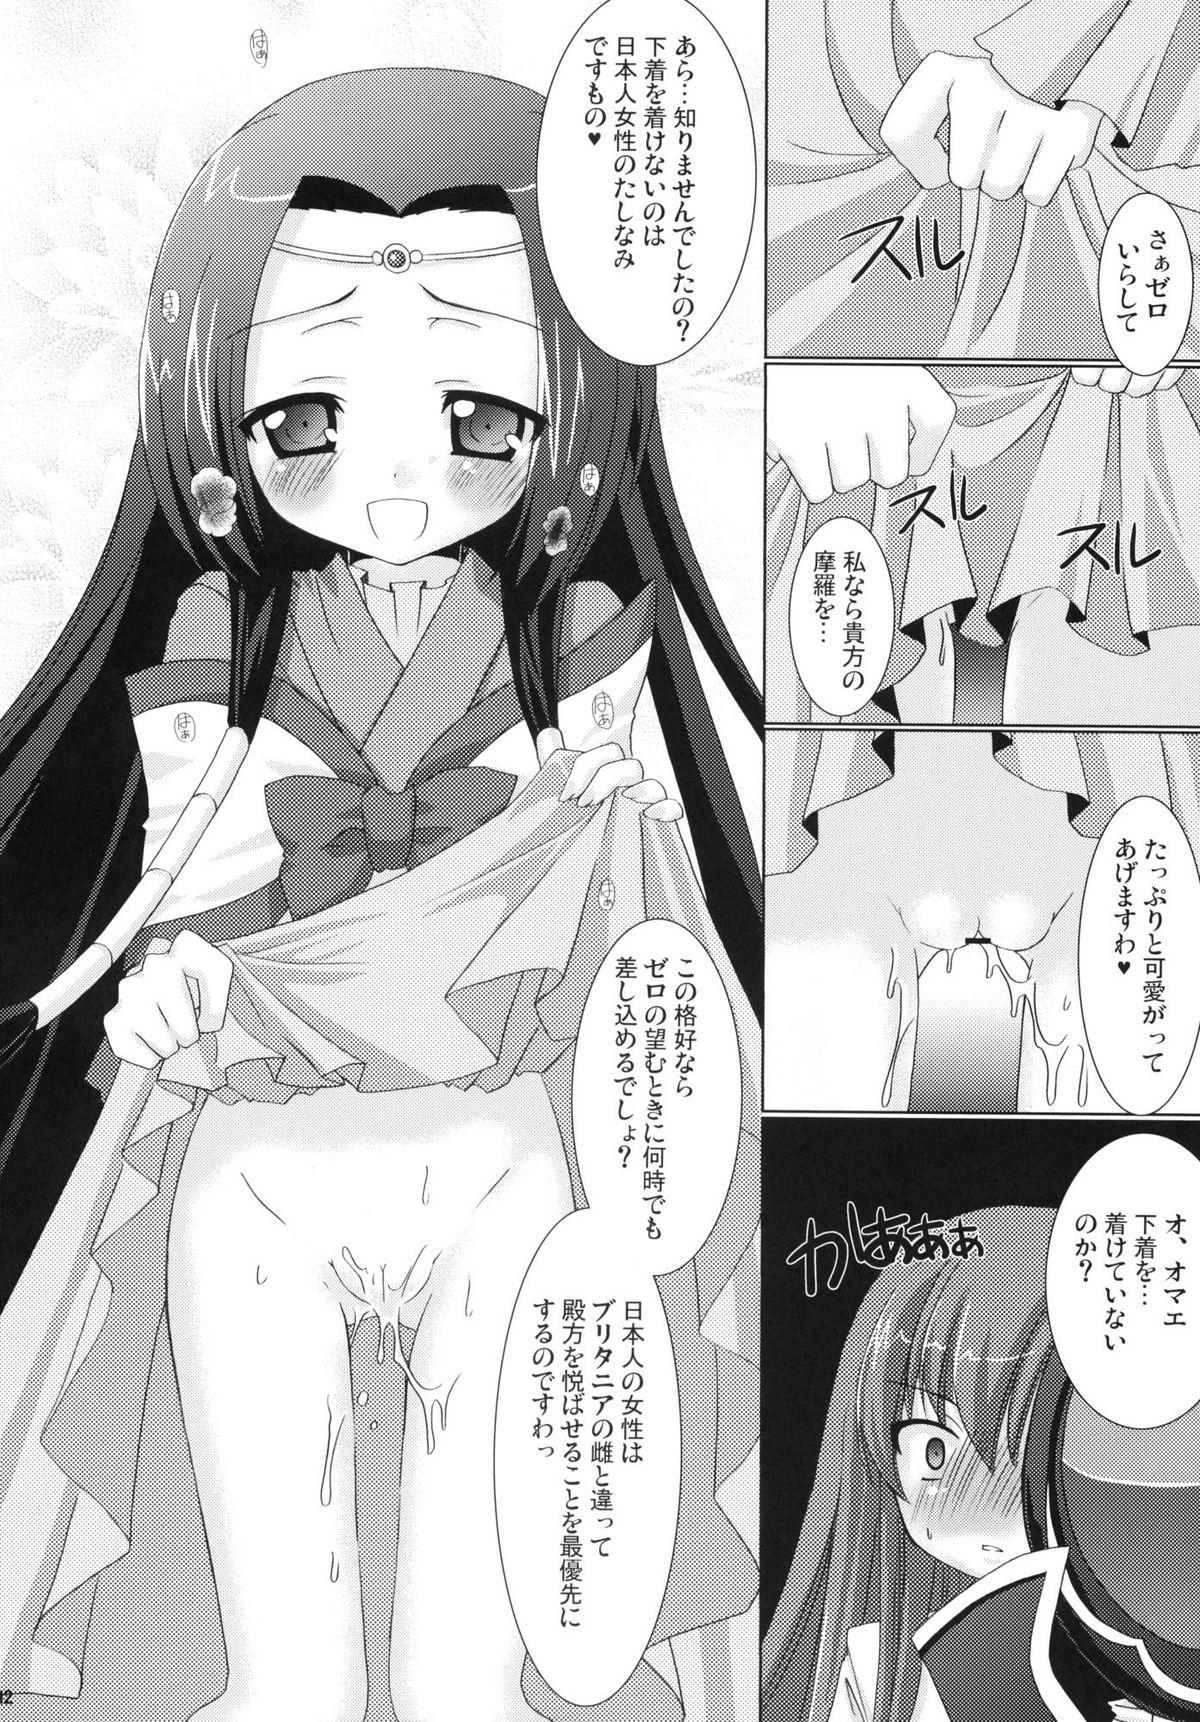 Slut Porn Kouhime Kyouhime - Code geass Chastity - Page 12